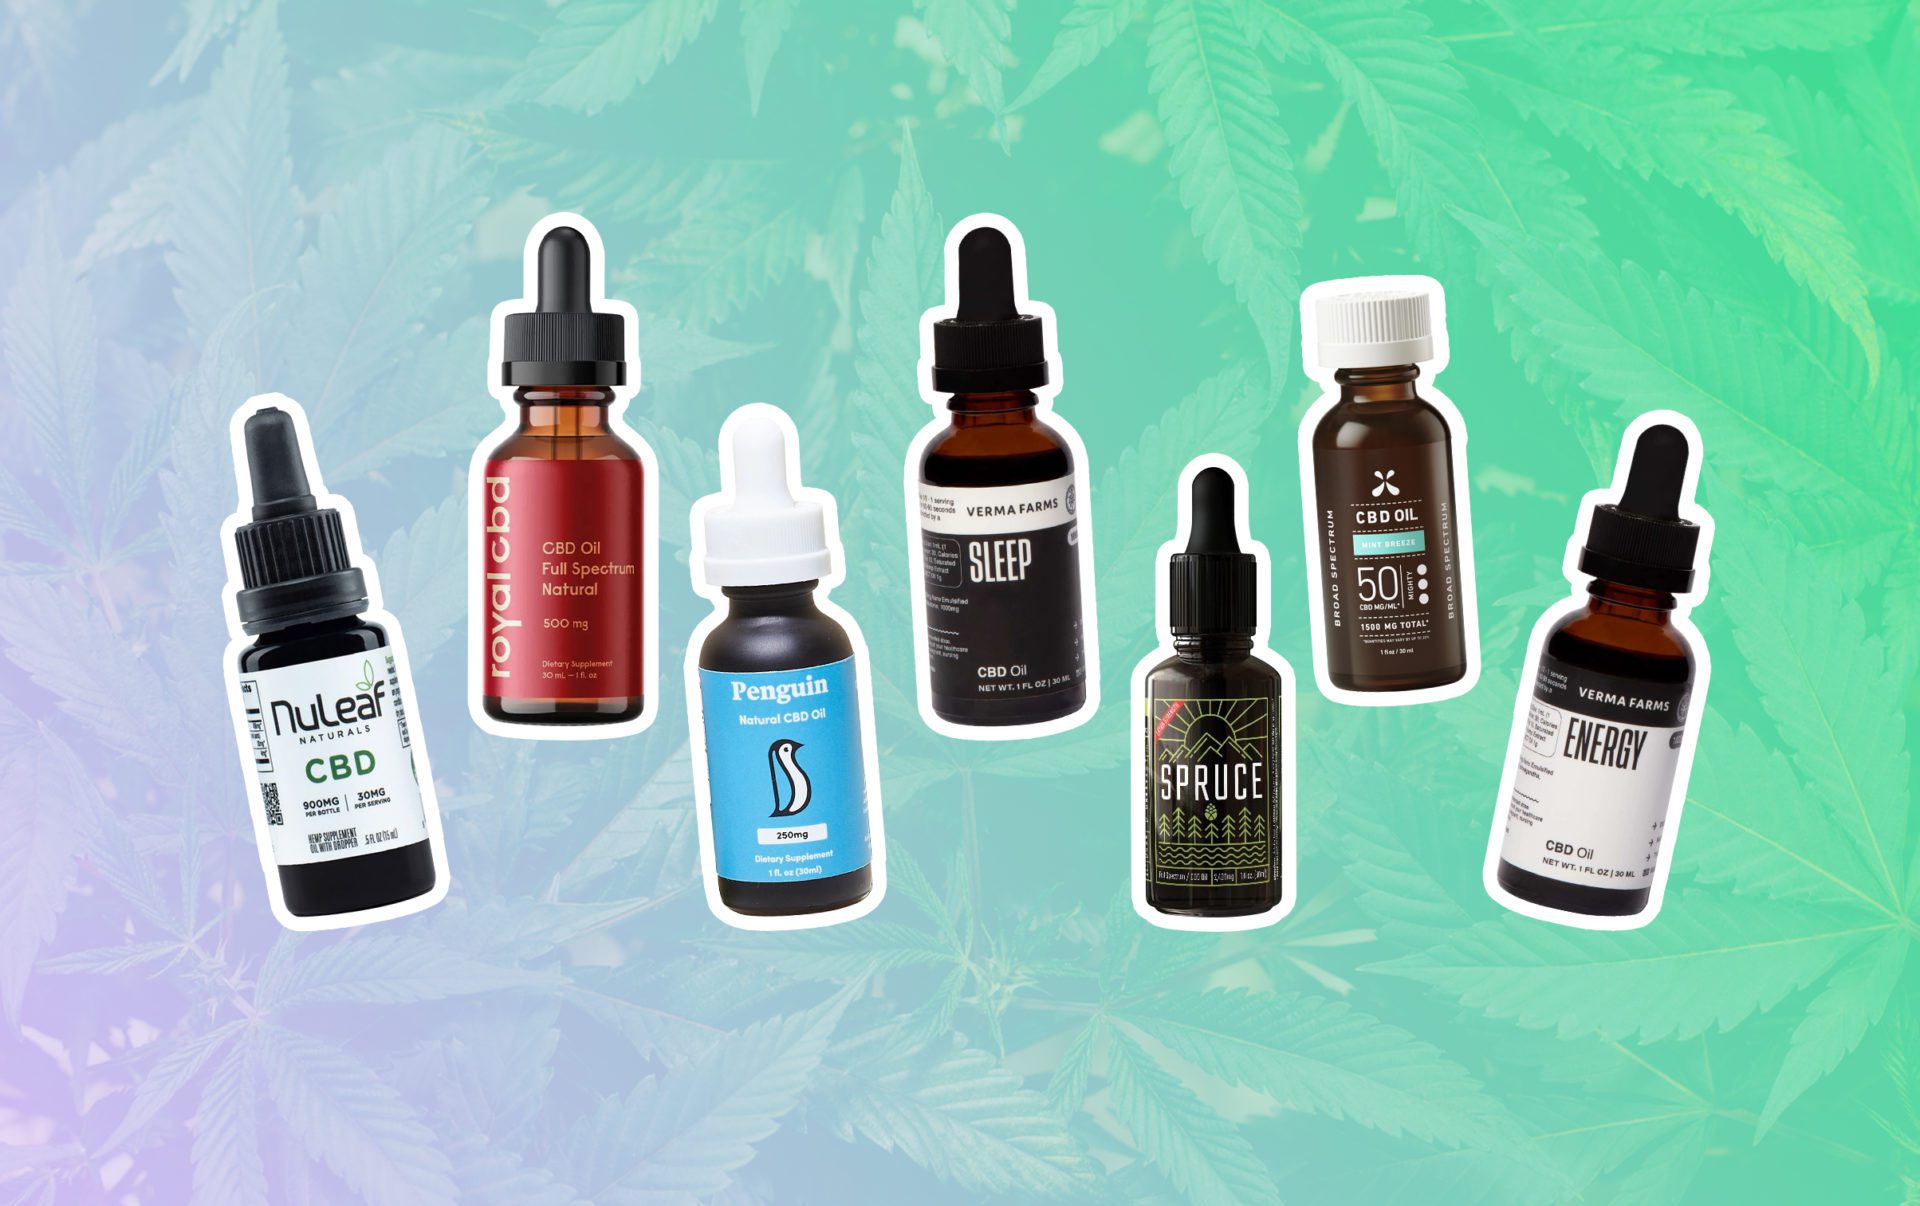 Best CBD Oils for Pain Relief, Sleep, Anxiety, and More